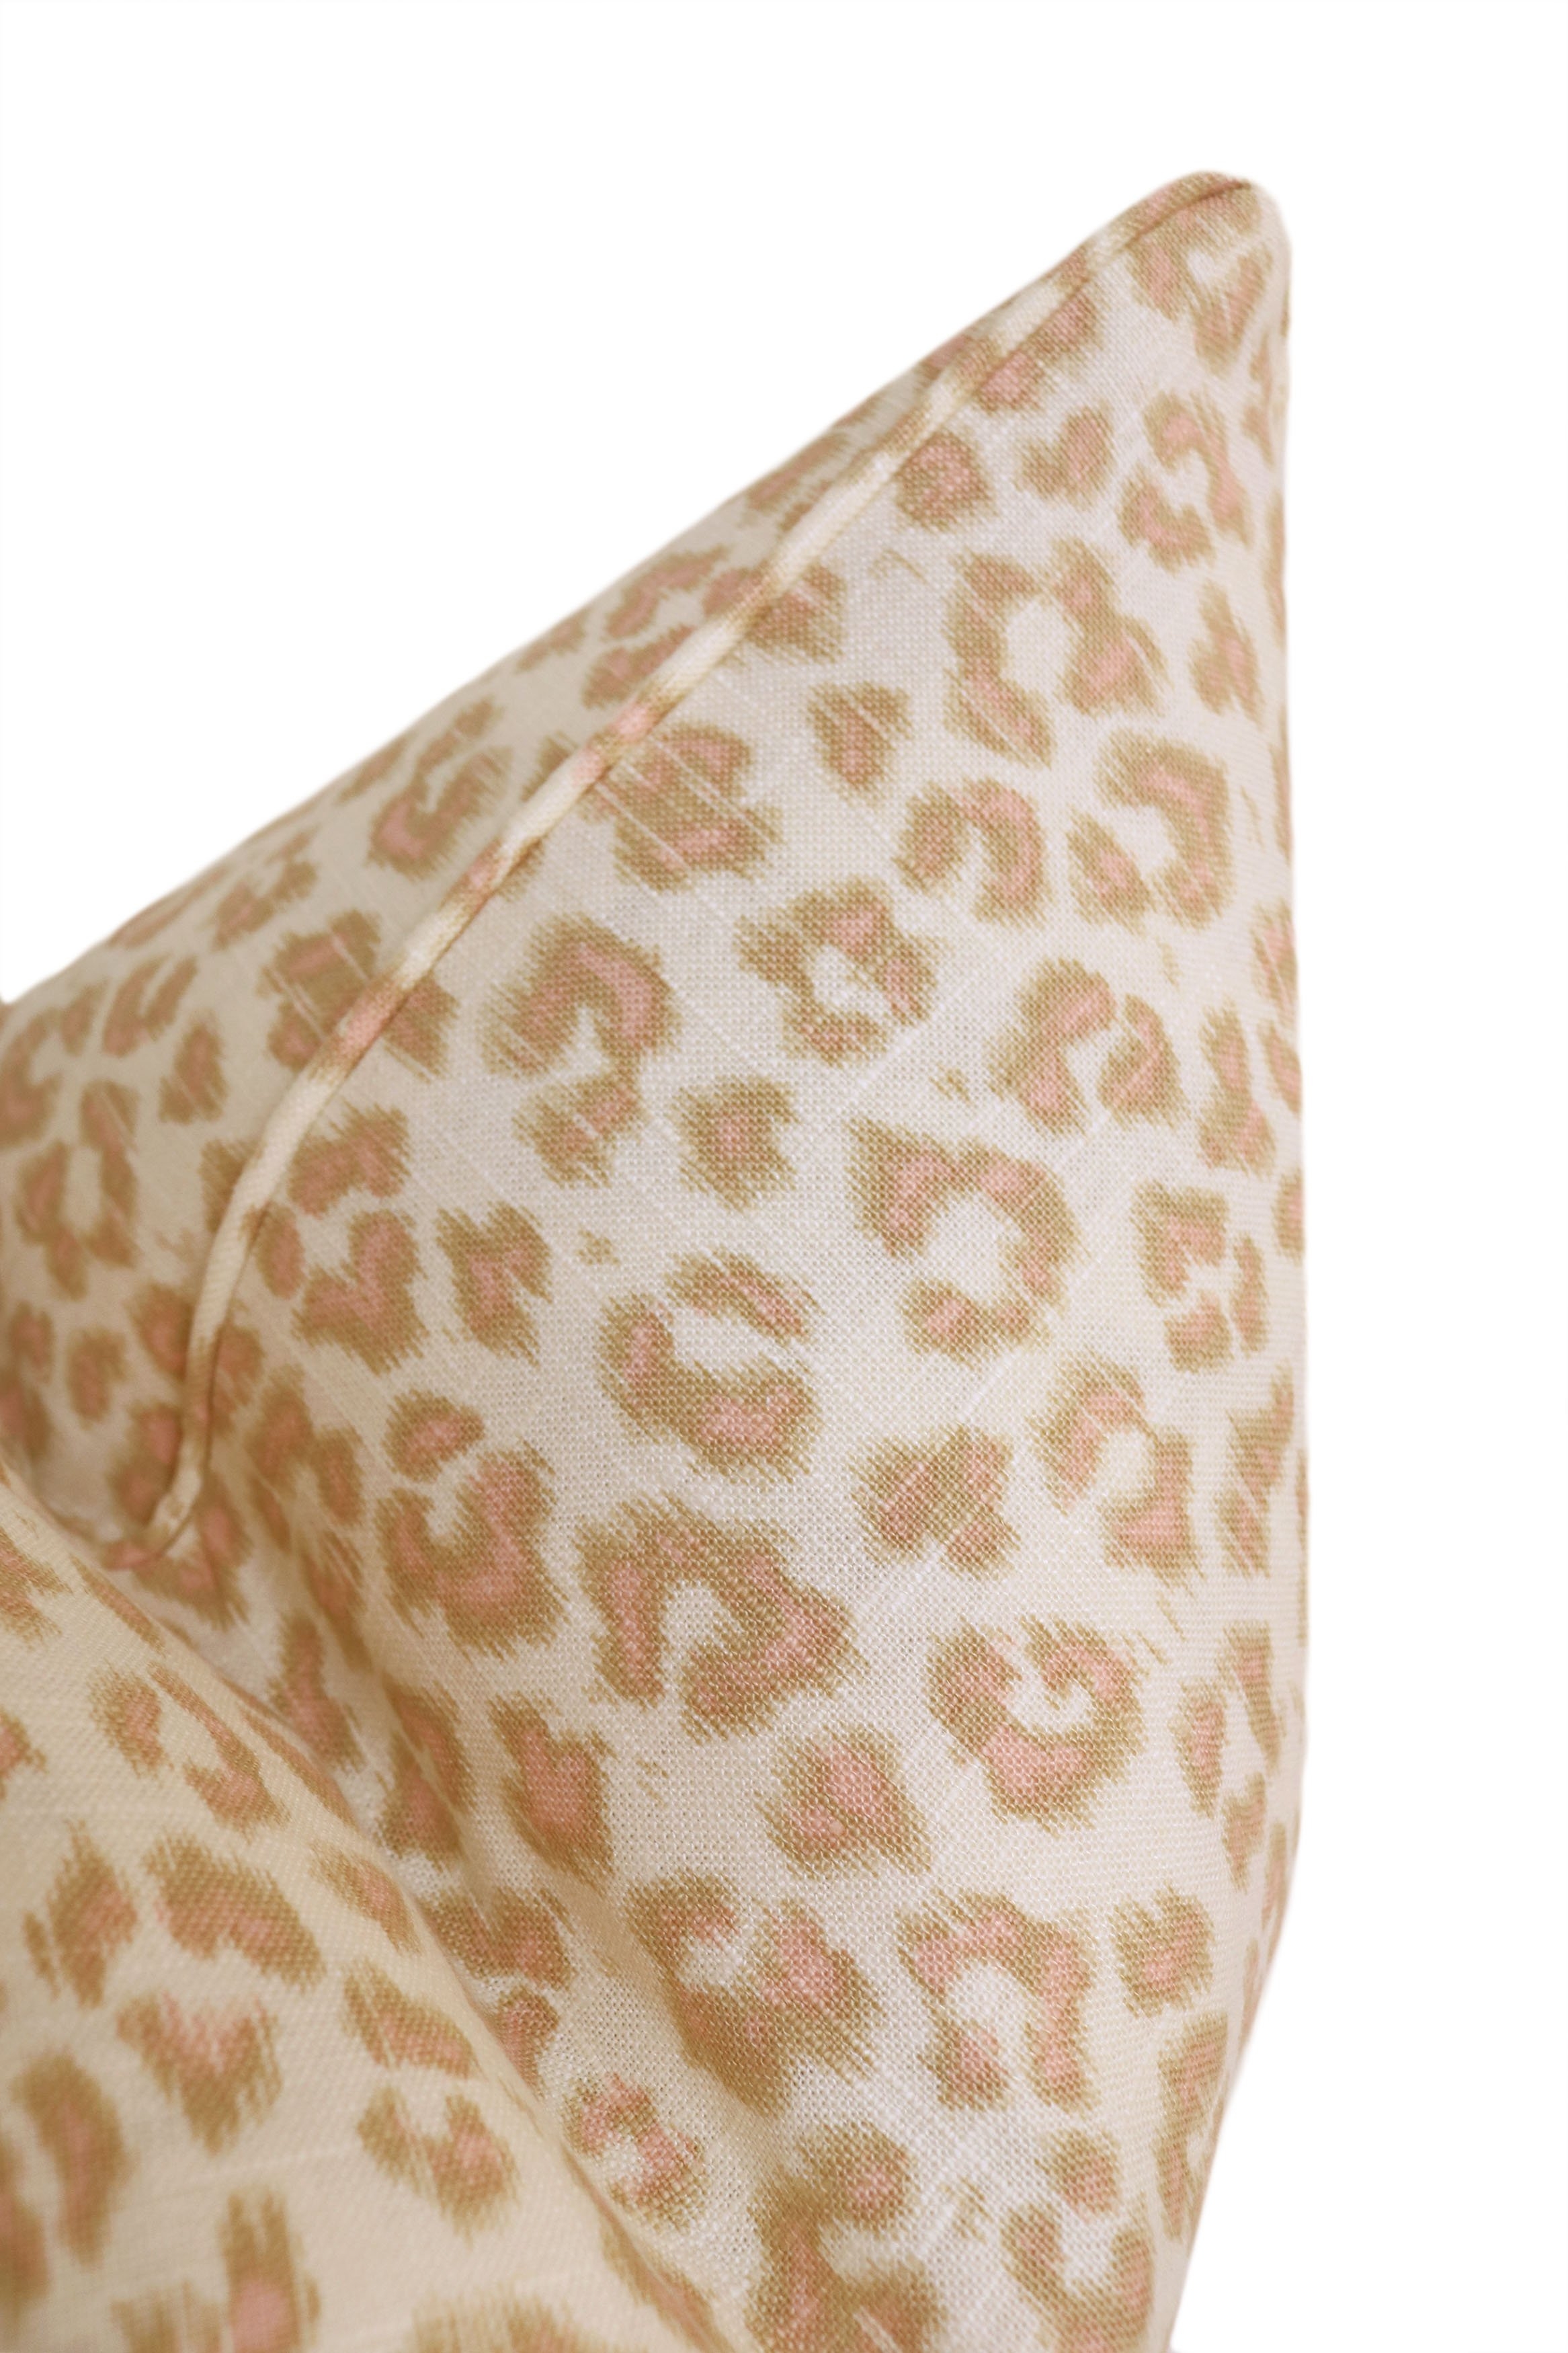 PIPED :: Leopard Linen Print // Blush - 20" X 20" - Image 2